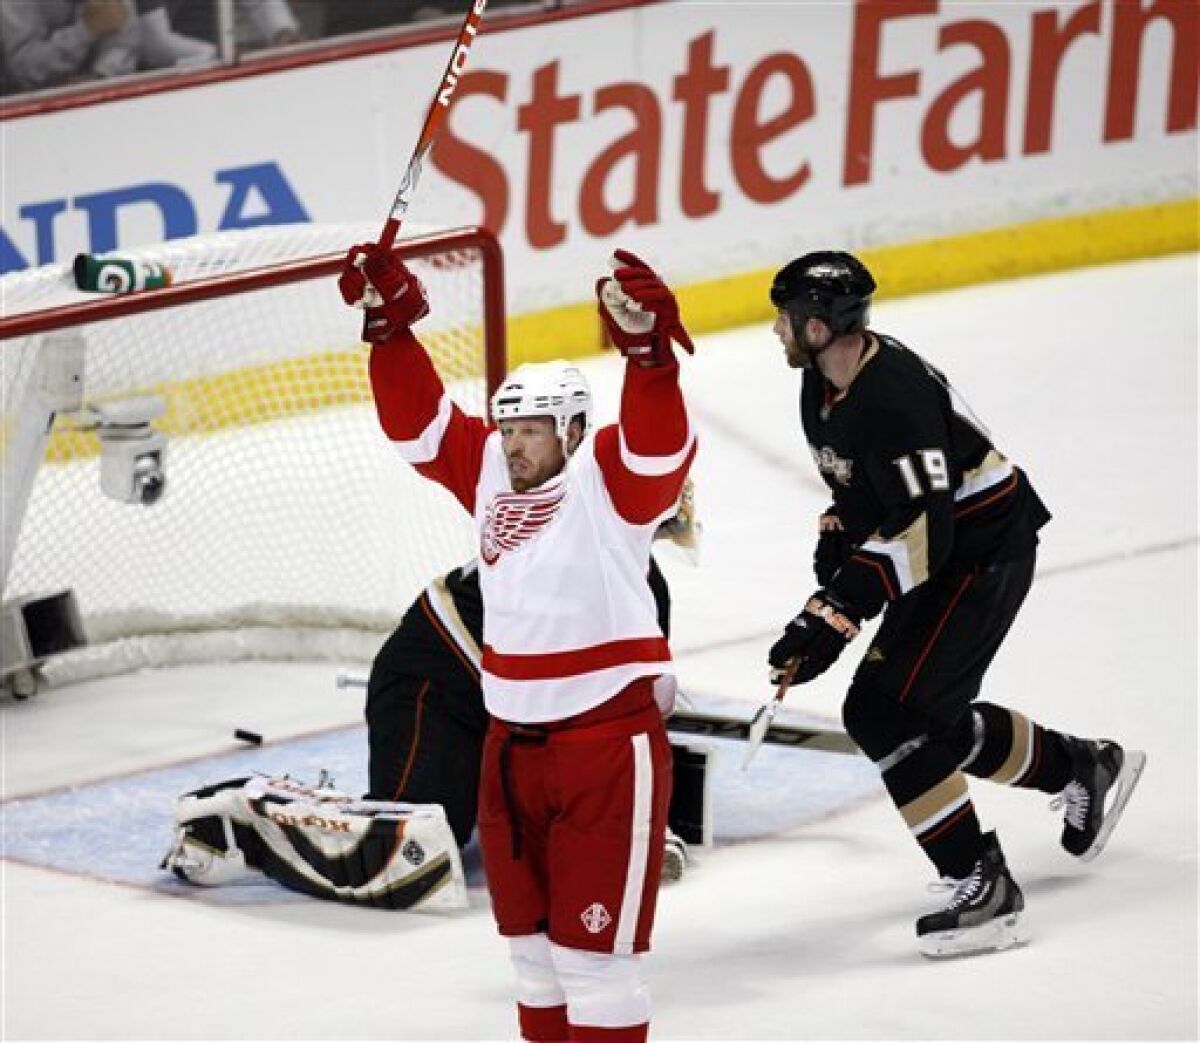 Detroit Red Wings left wing Johan Franzen, of Sweden, raises his hands after scoring the Red Wings' second goal against the Anaheim Ducks in the first period of a second-round NHL hockey playoff game in Anaheim, Calif., Thursday, May 7, 2009. In the background are Anaheim Ducks goalie Jonas Hiller, of Switzerland, and Anaheim Ducks defenseman Ryan Whitney. (AP Photo/Henry DiRocco)